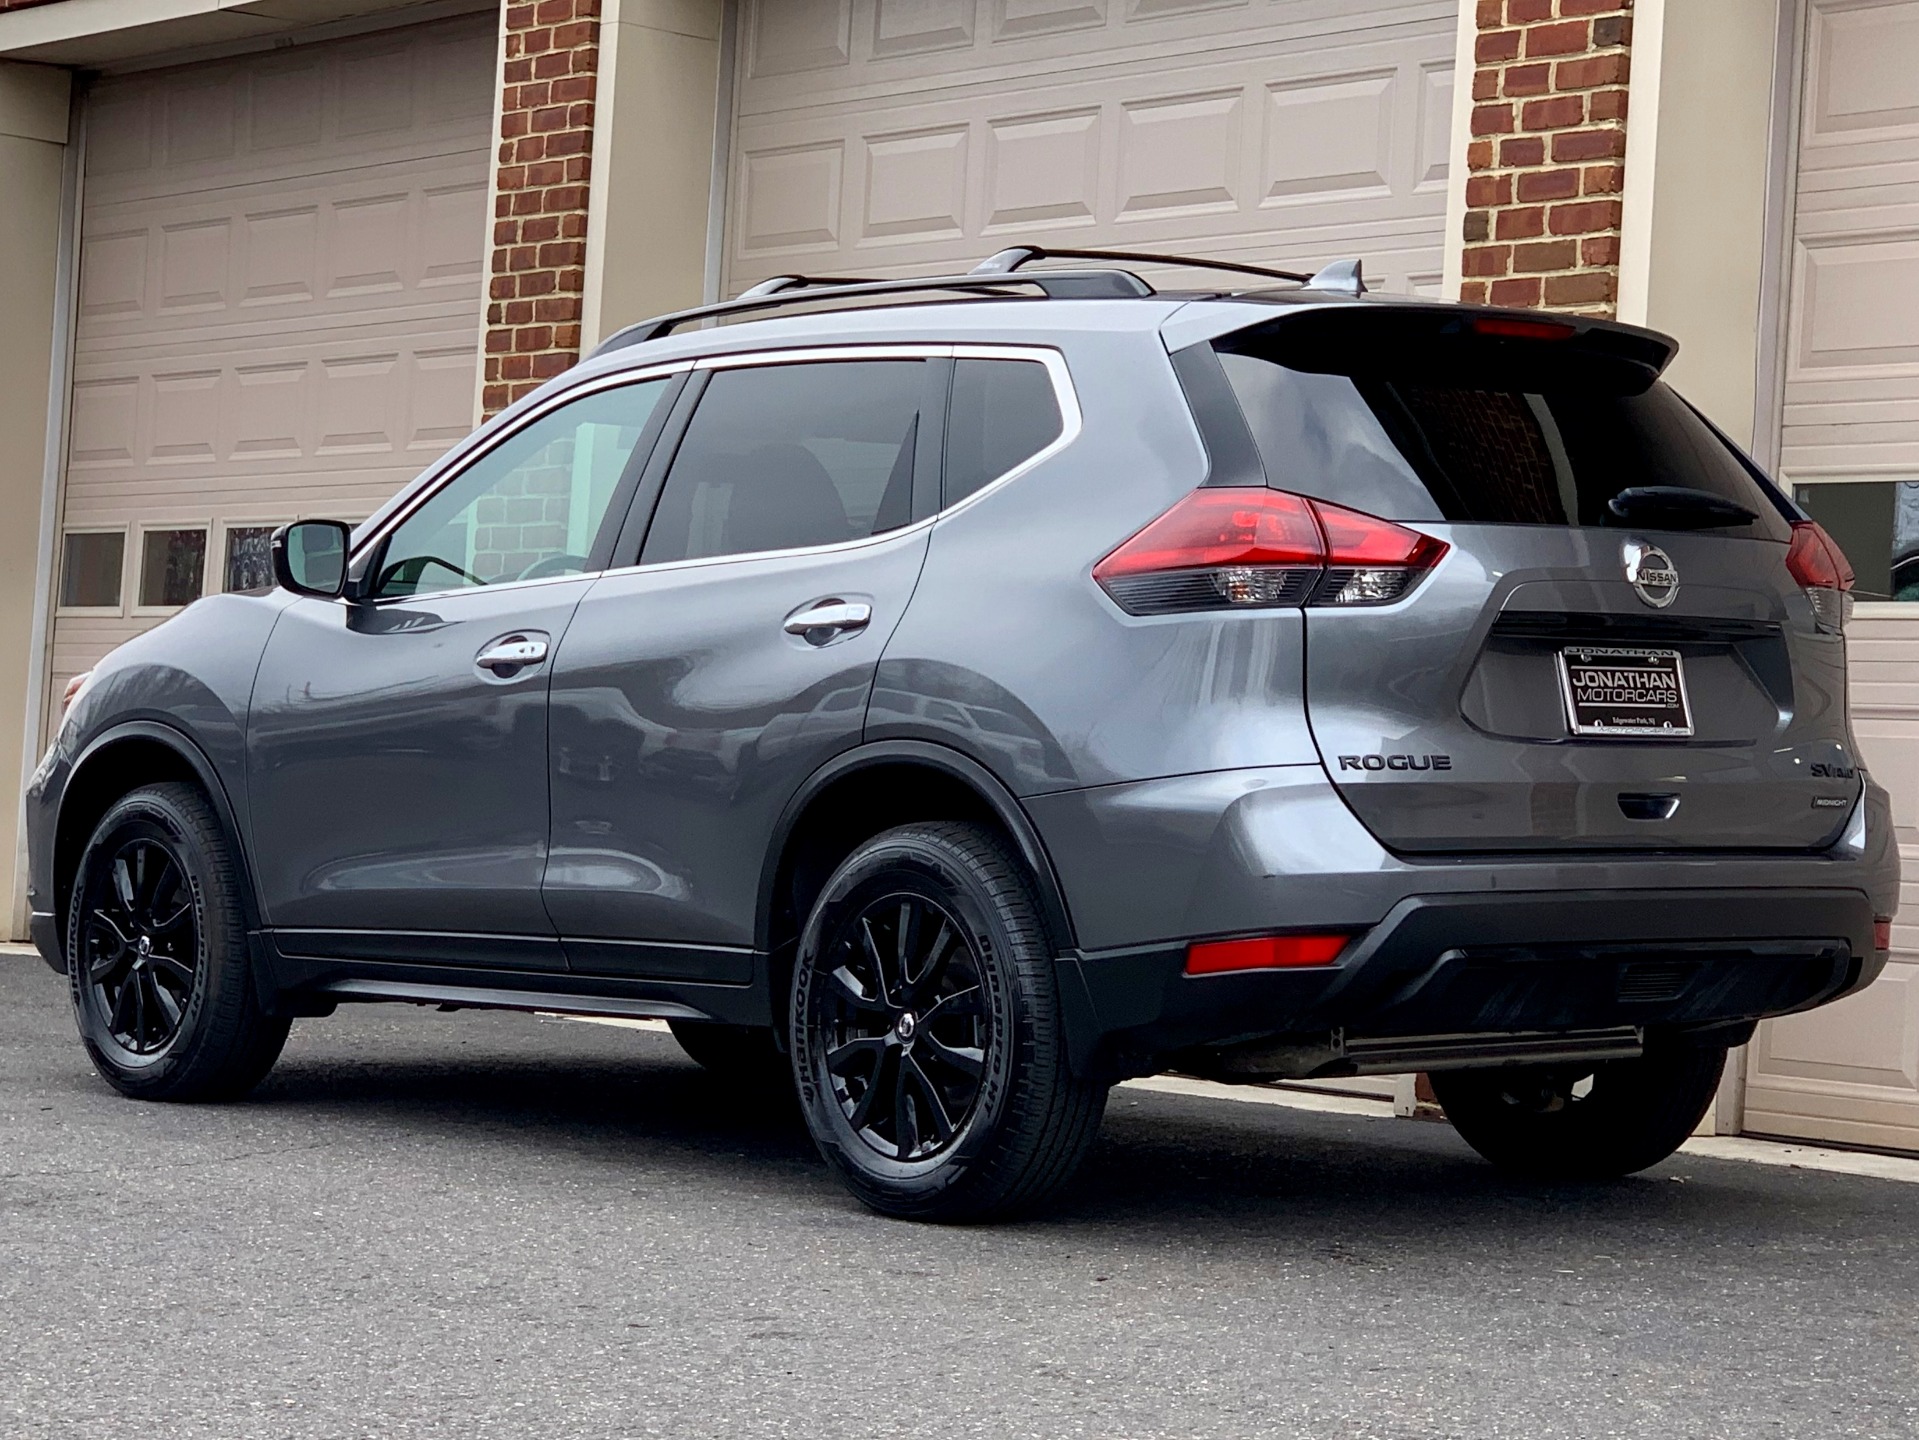 2018 Nissan Rogue SV AWD Midnight Edition Stock 784533 for sale near